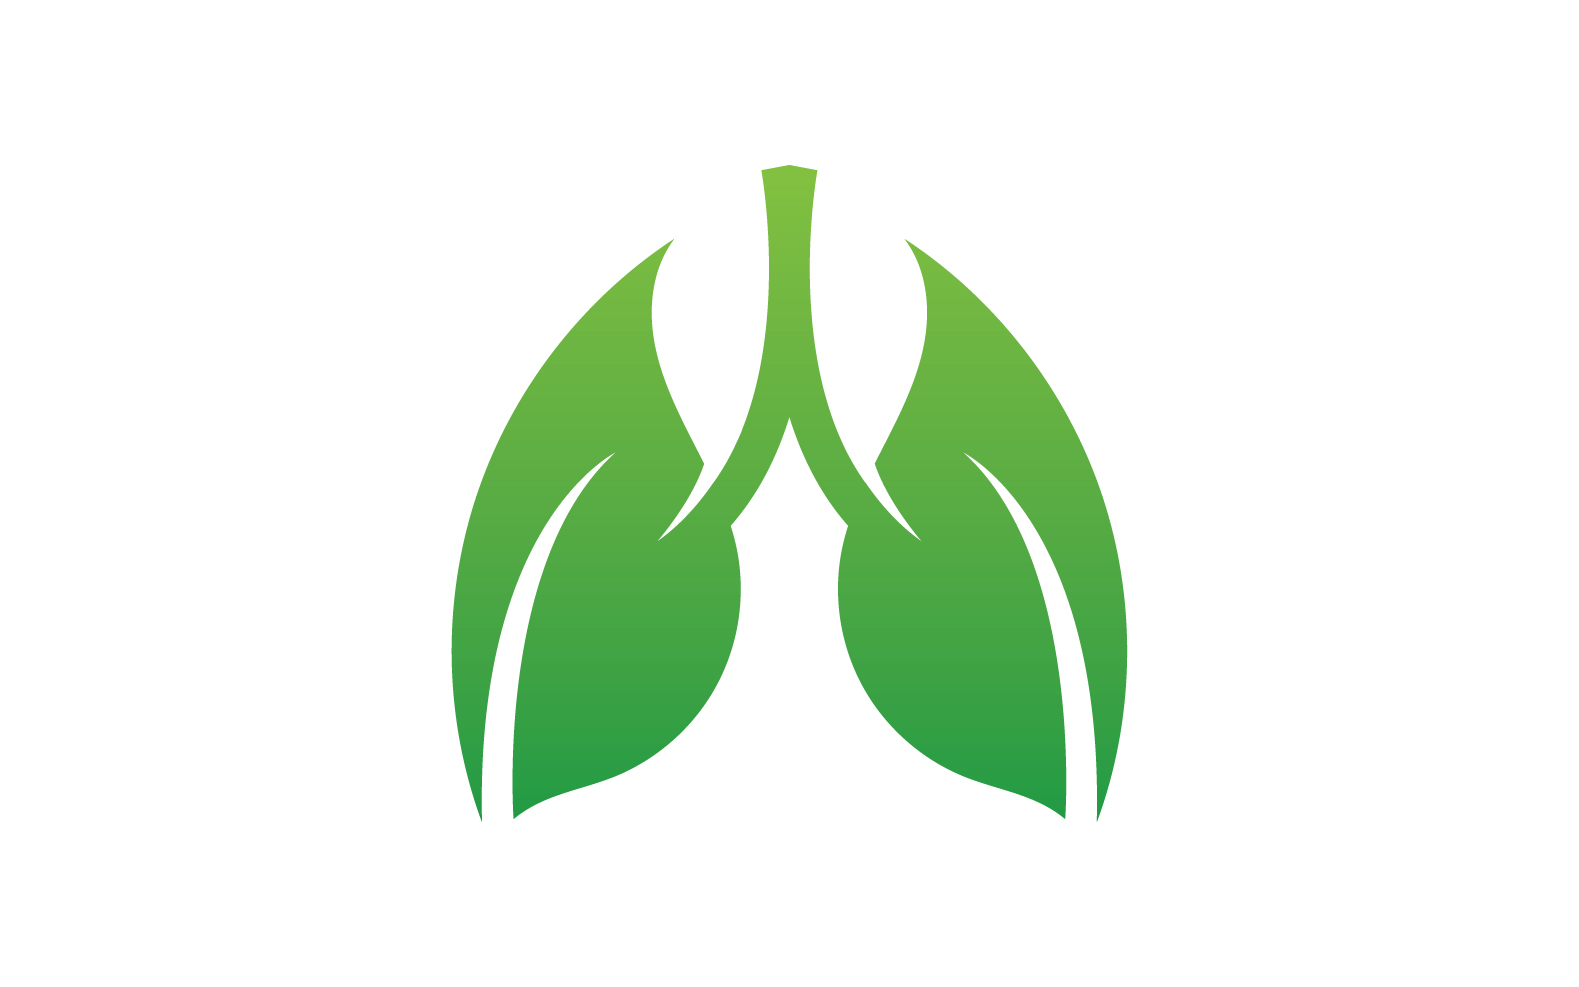 Health lungs logo and symbol vector v10